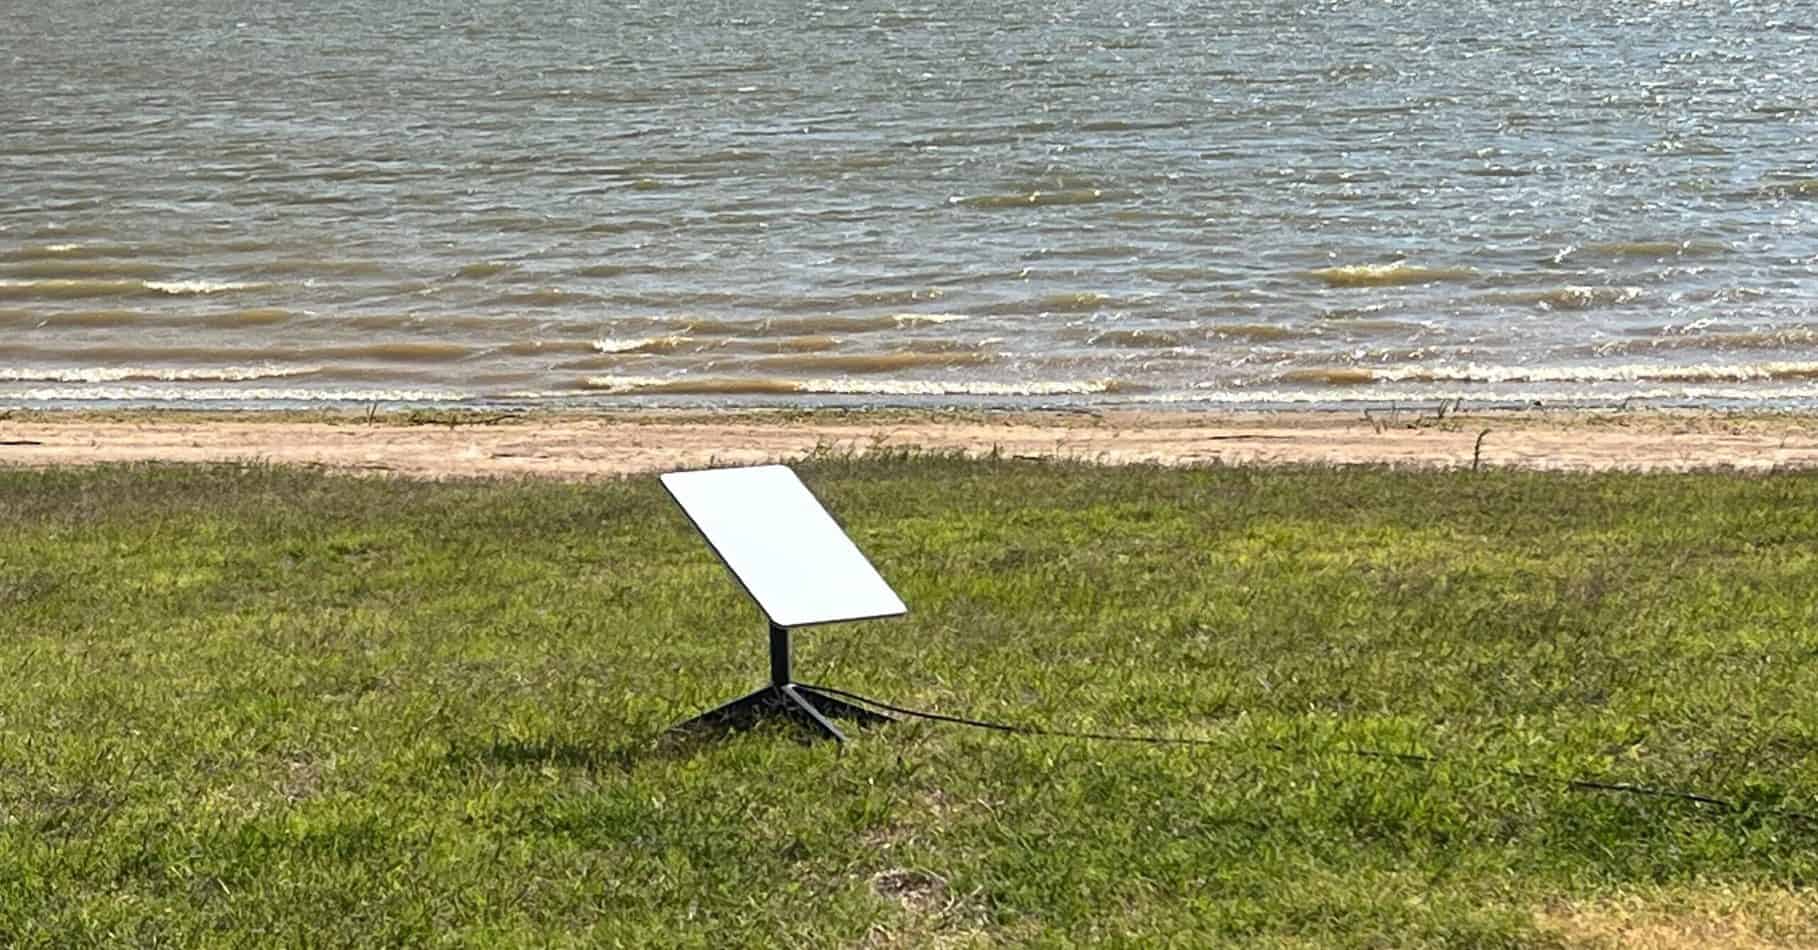 A Starlink Antenna sits near the shore at a remote campground.